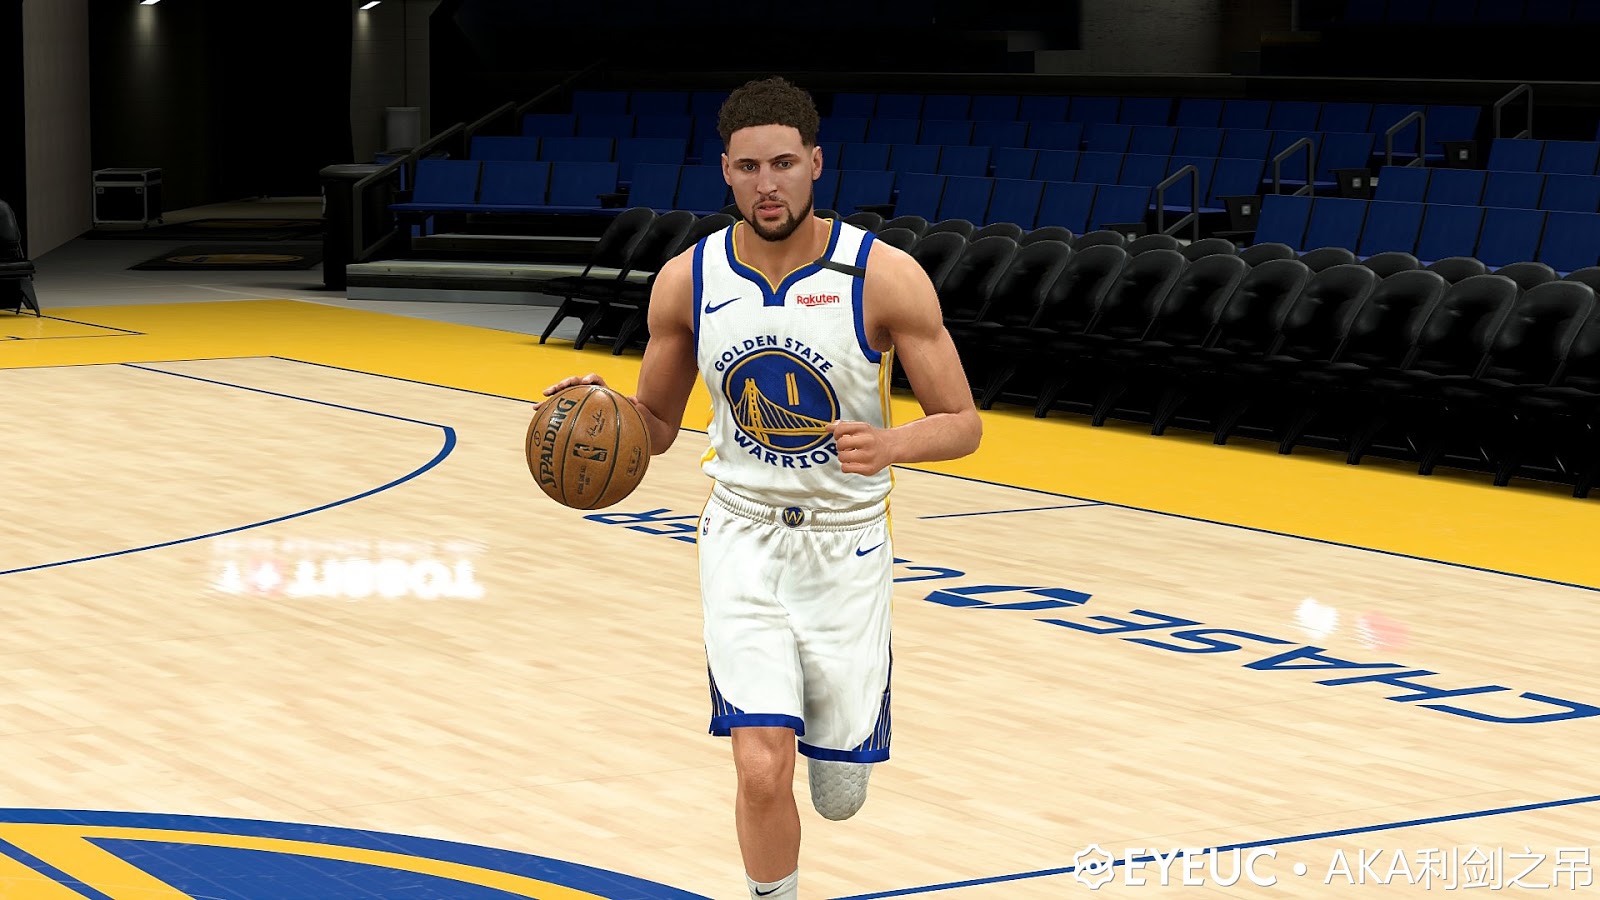 Klay Thompson Face And Body Model By AKA Sword Hang [FOR 2K20]